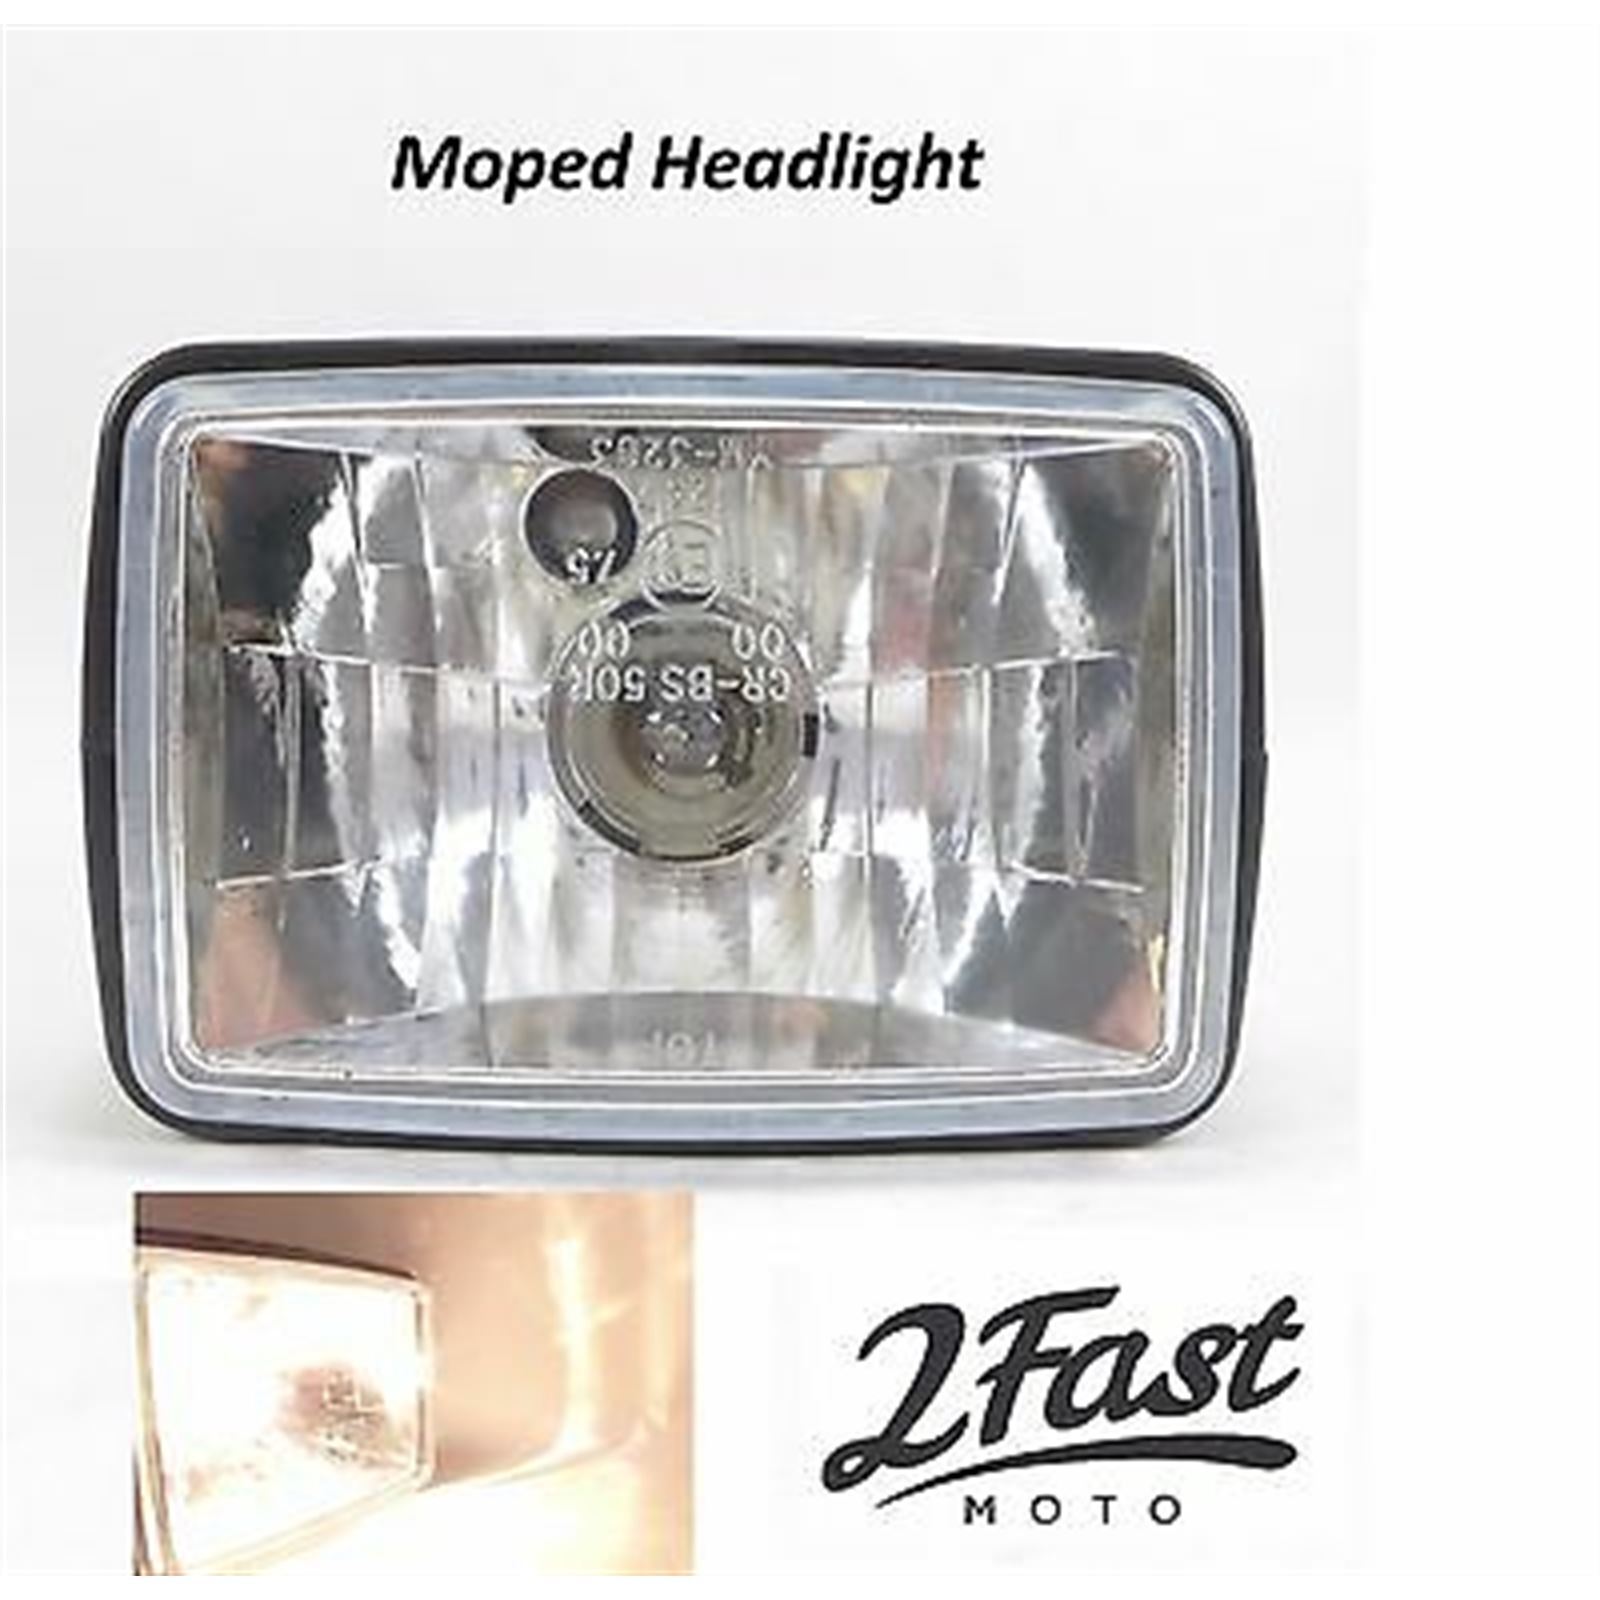 2FastMoto Headlight Assembly For Tomos A55 A-55 Sprint ST Targa 41-29210